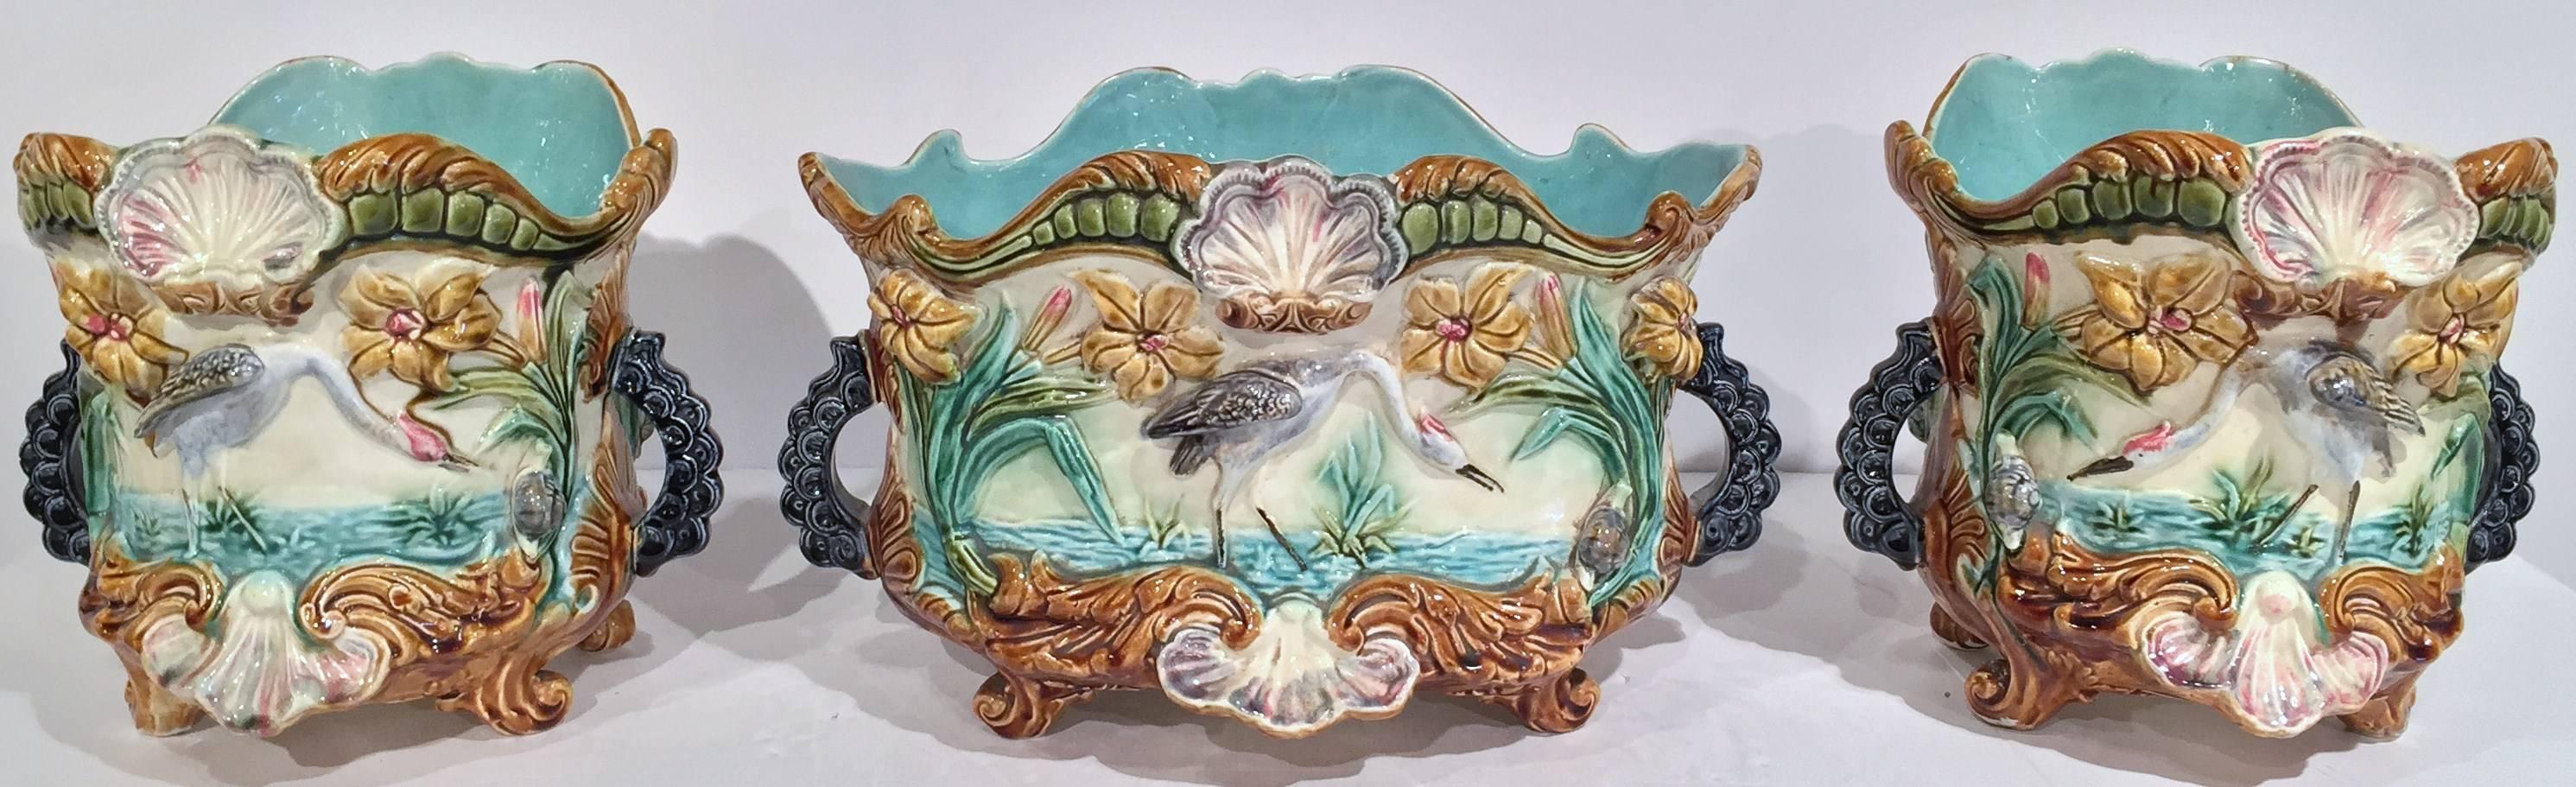 Beautiful set of three hand-painted and colorful Majolica cachepots with handles, circa 1870, featuring herons and flowers in relief. Excellent condition with vivid colors.